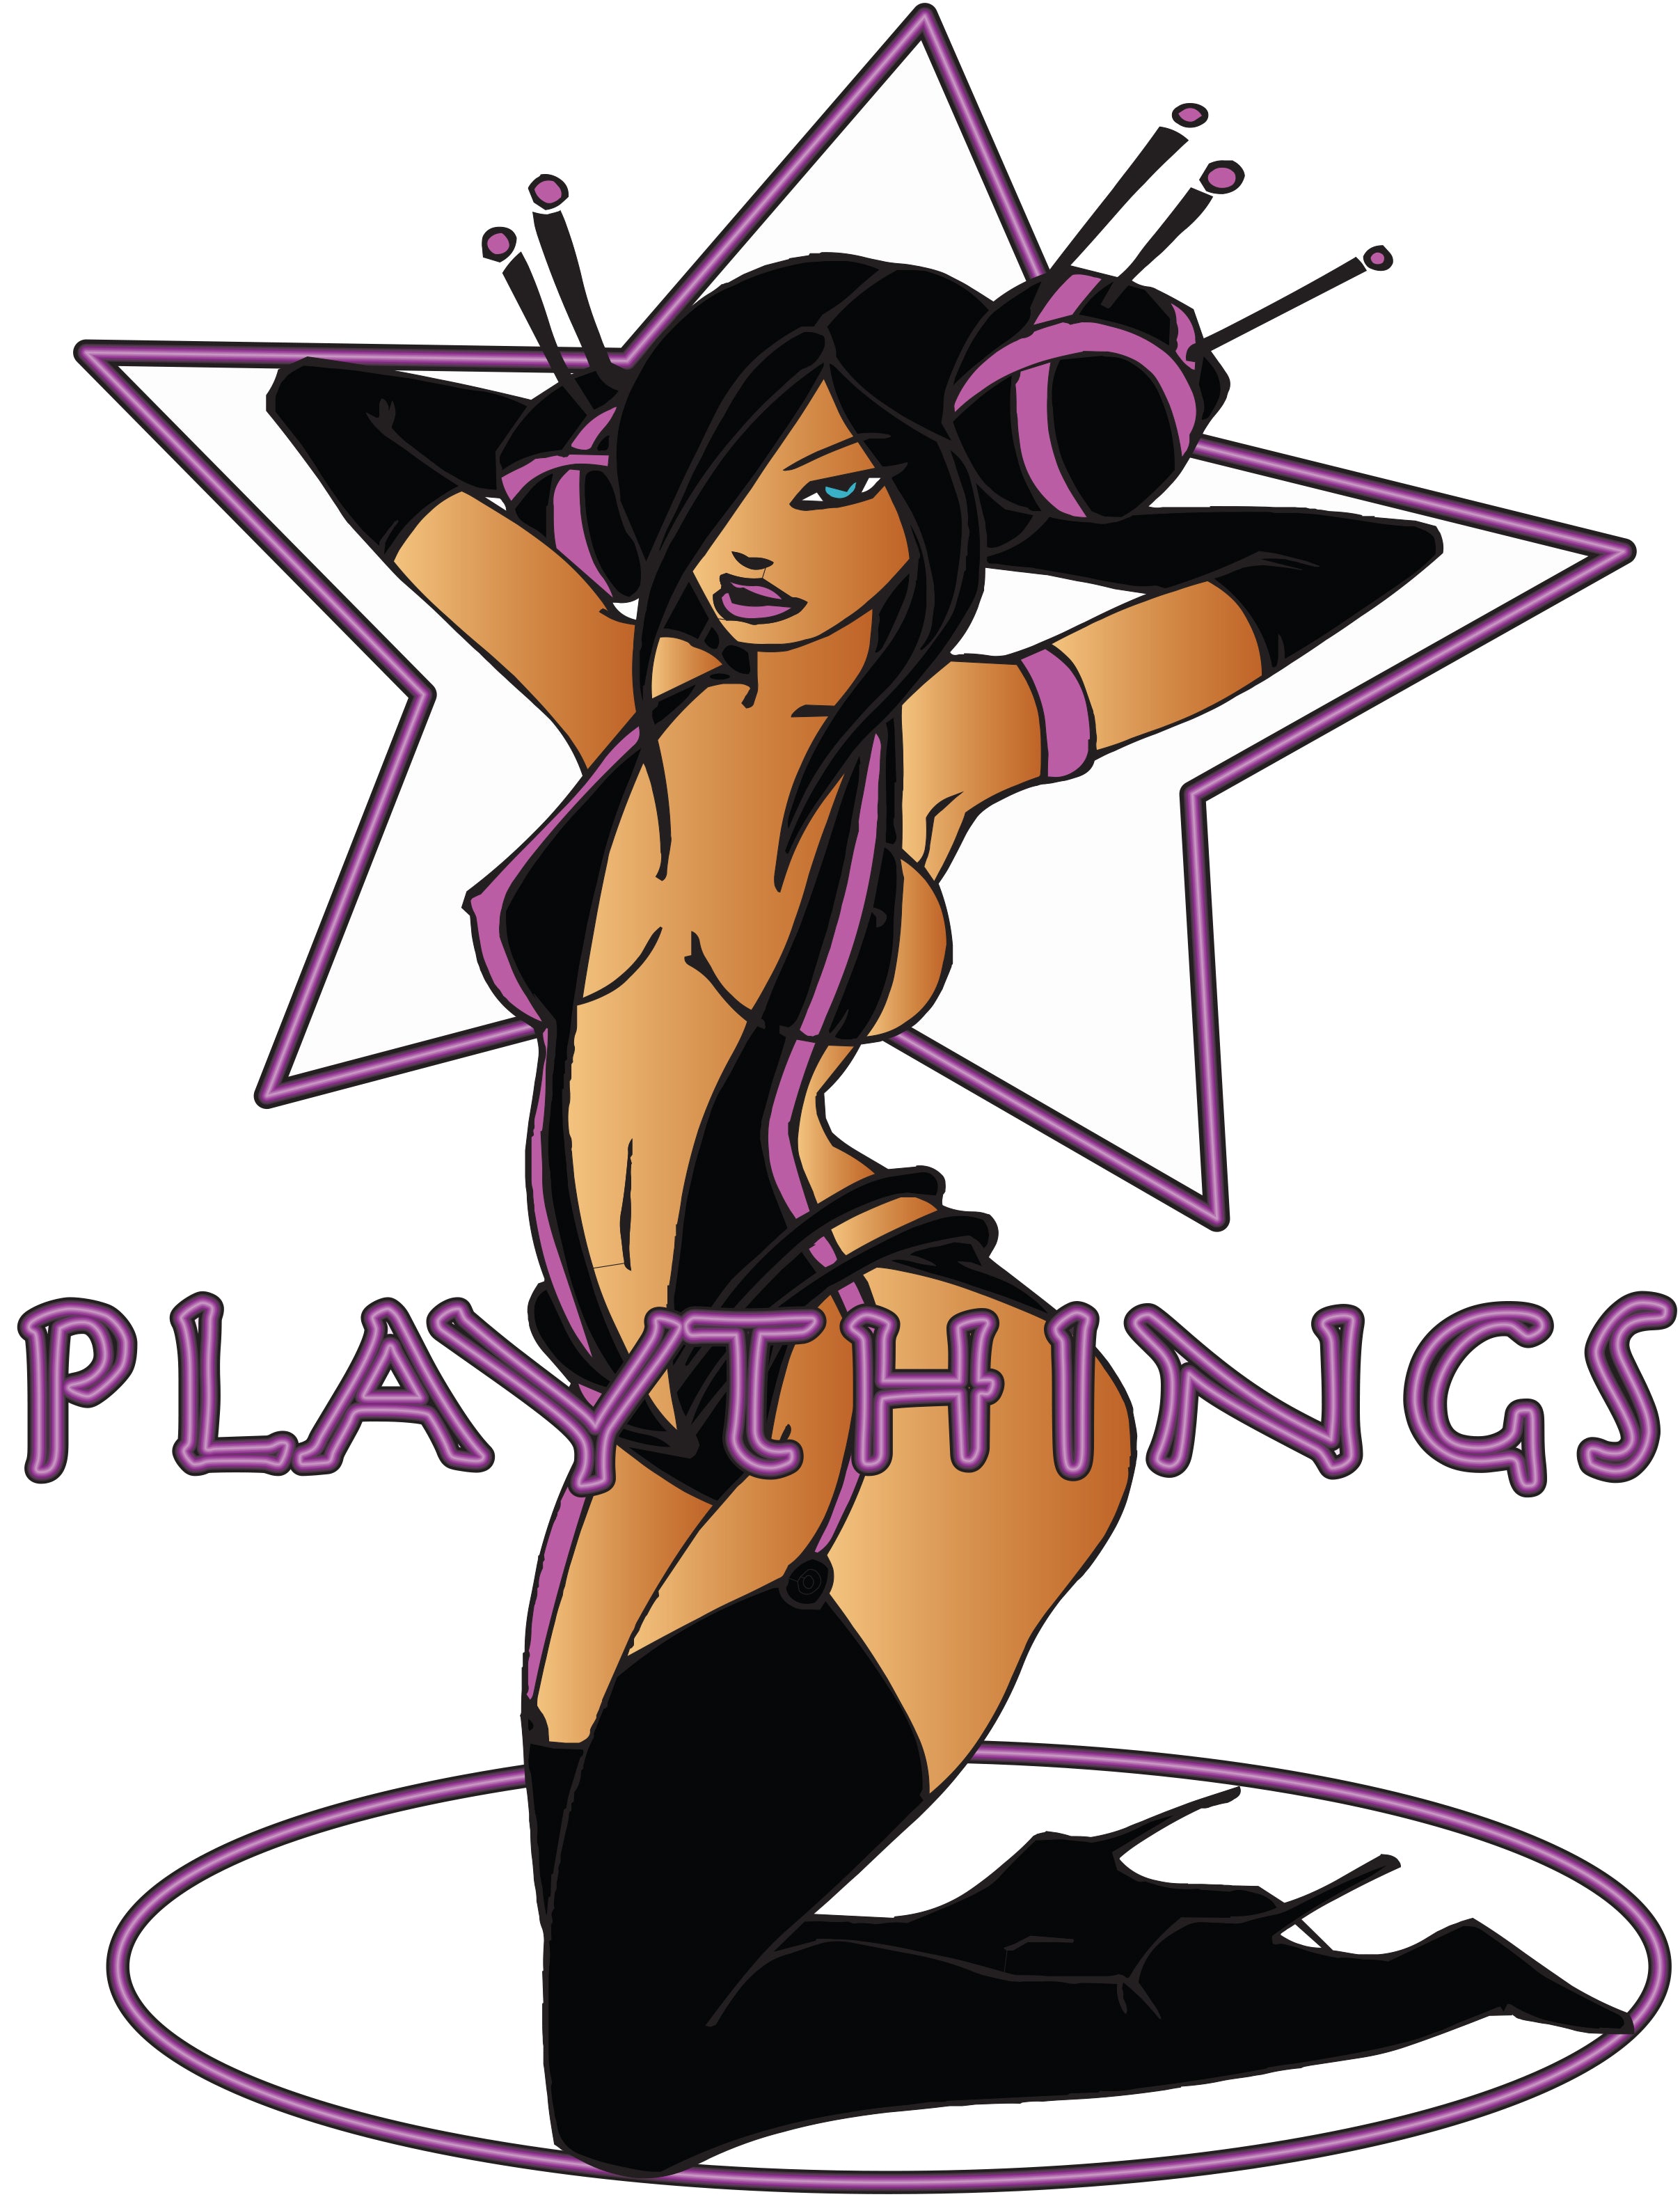 Playthings® - Sex Toys and Outfits Store Miami pic